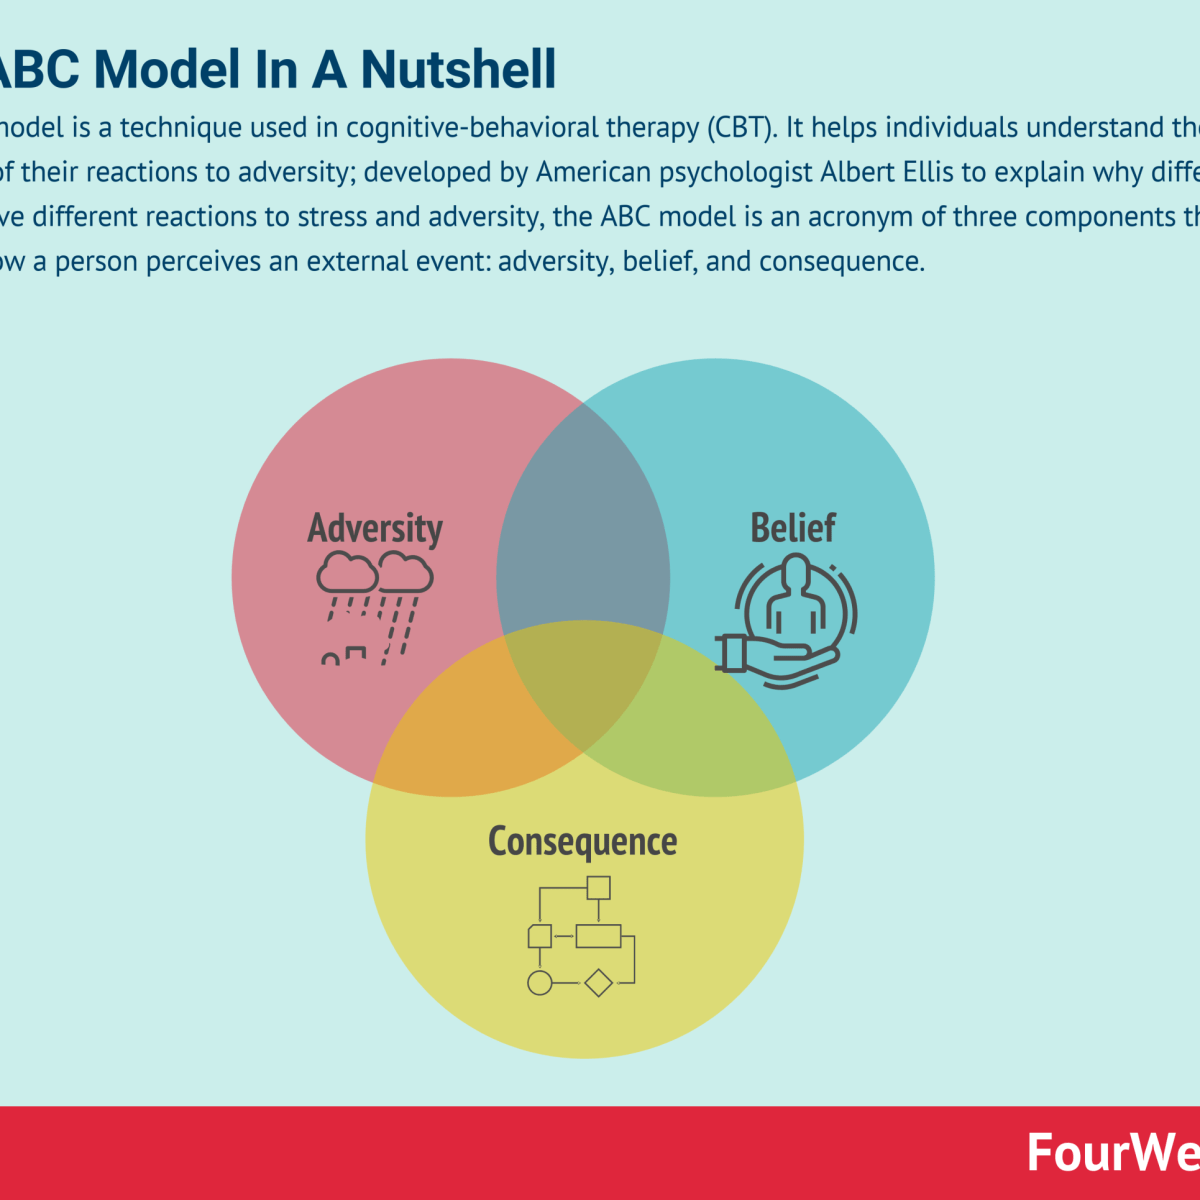 What Is The ABC Model? The ABC Model In A Nutshell - FourWeekMBA